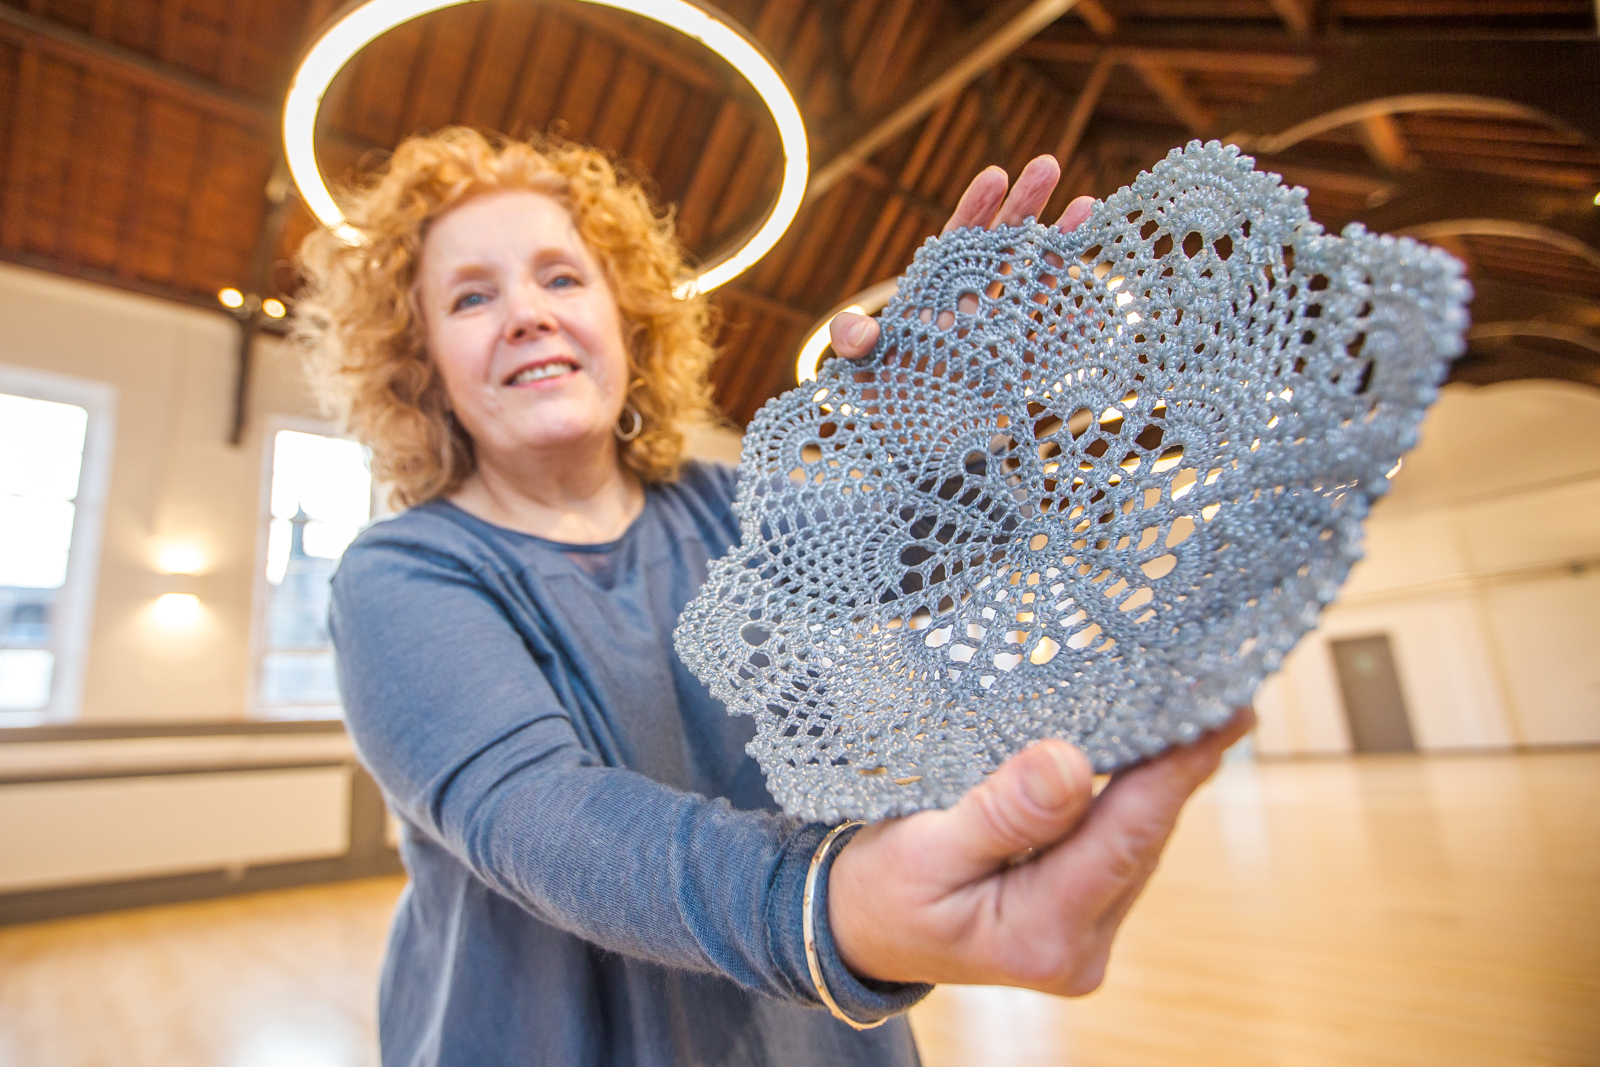 The first major creative hub opens in the Highlands. Pictured is Catherine Carr holding a piece crocheted glass.